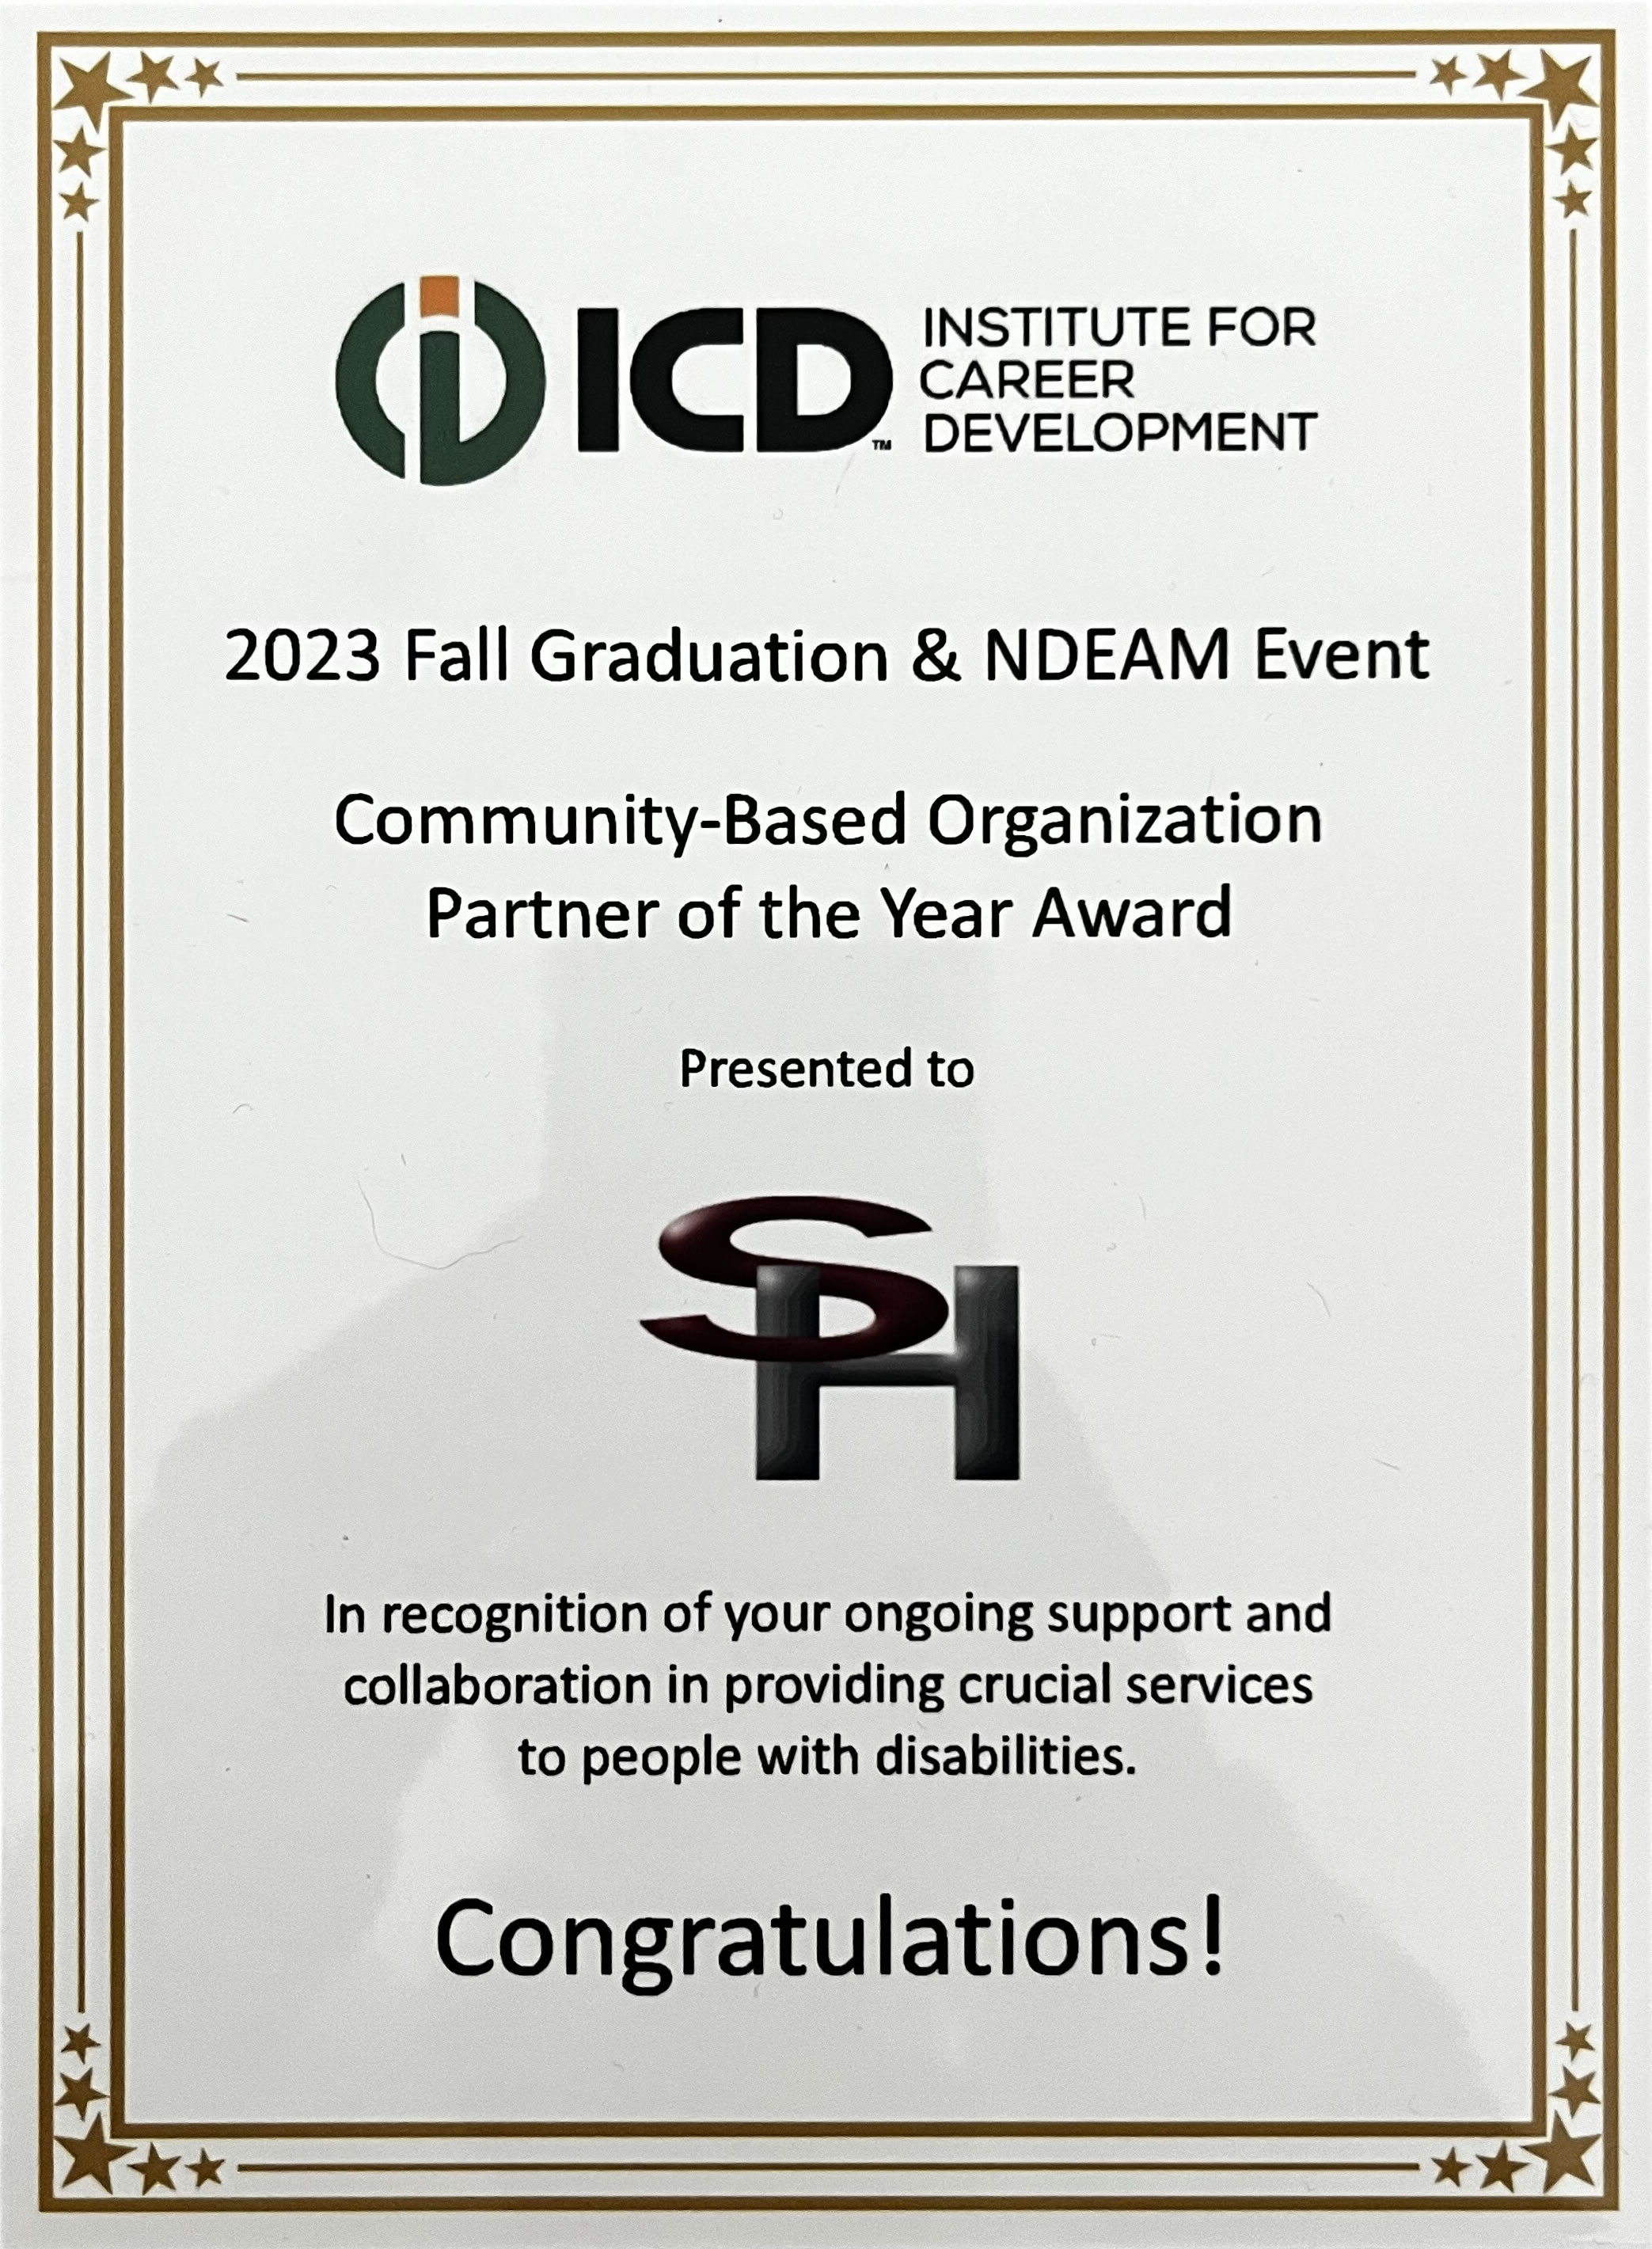 read more about our 2023 ICD Partner of the Year award